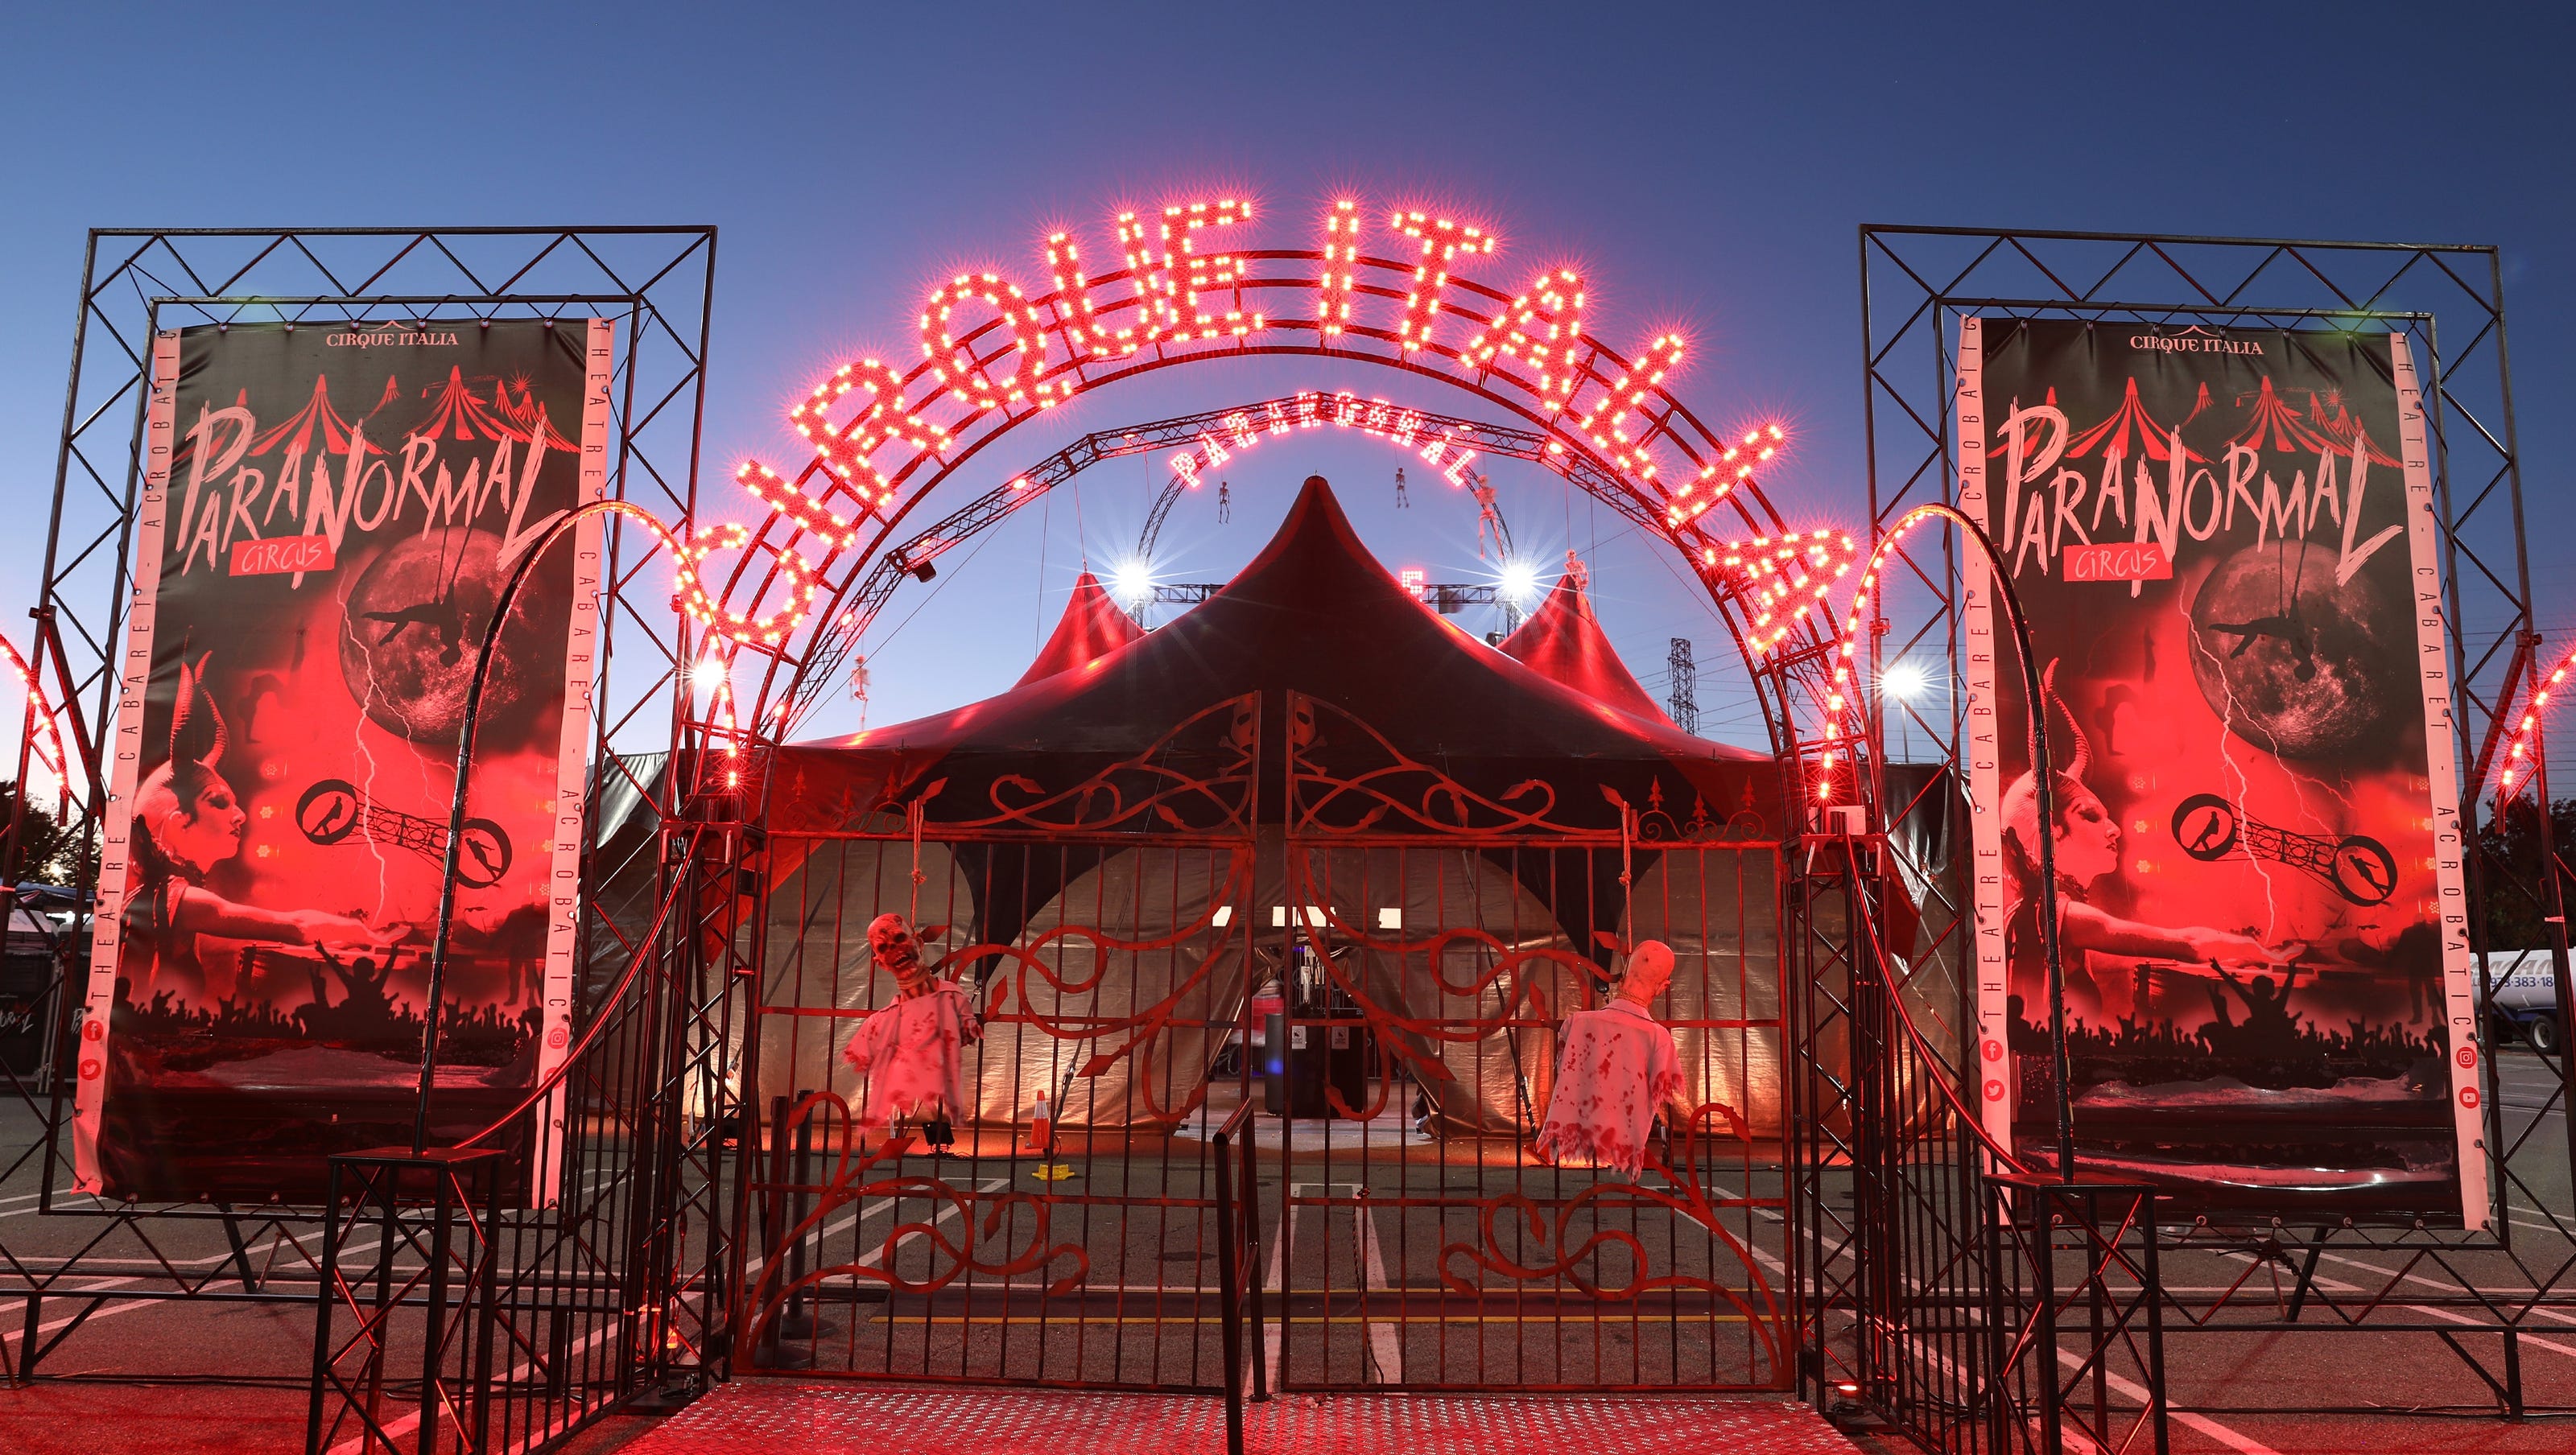 Paranormal Cirque to thrill with horrorthemed circus show